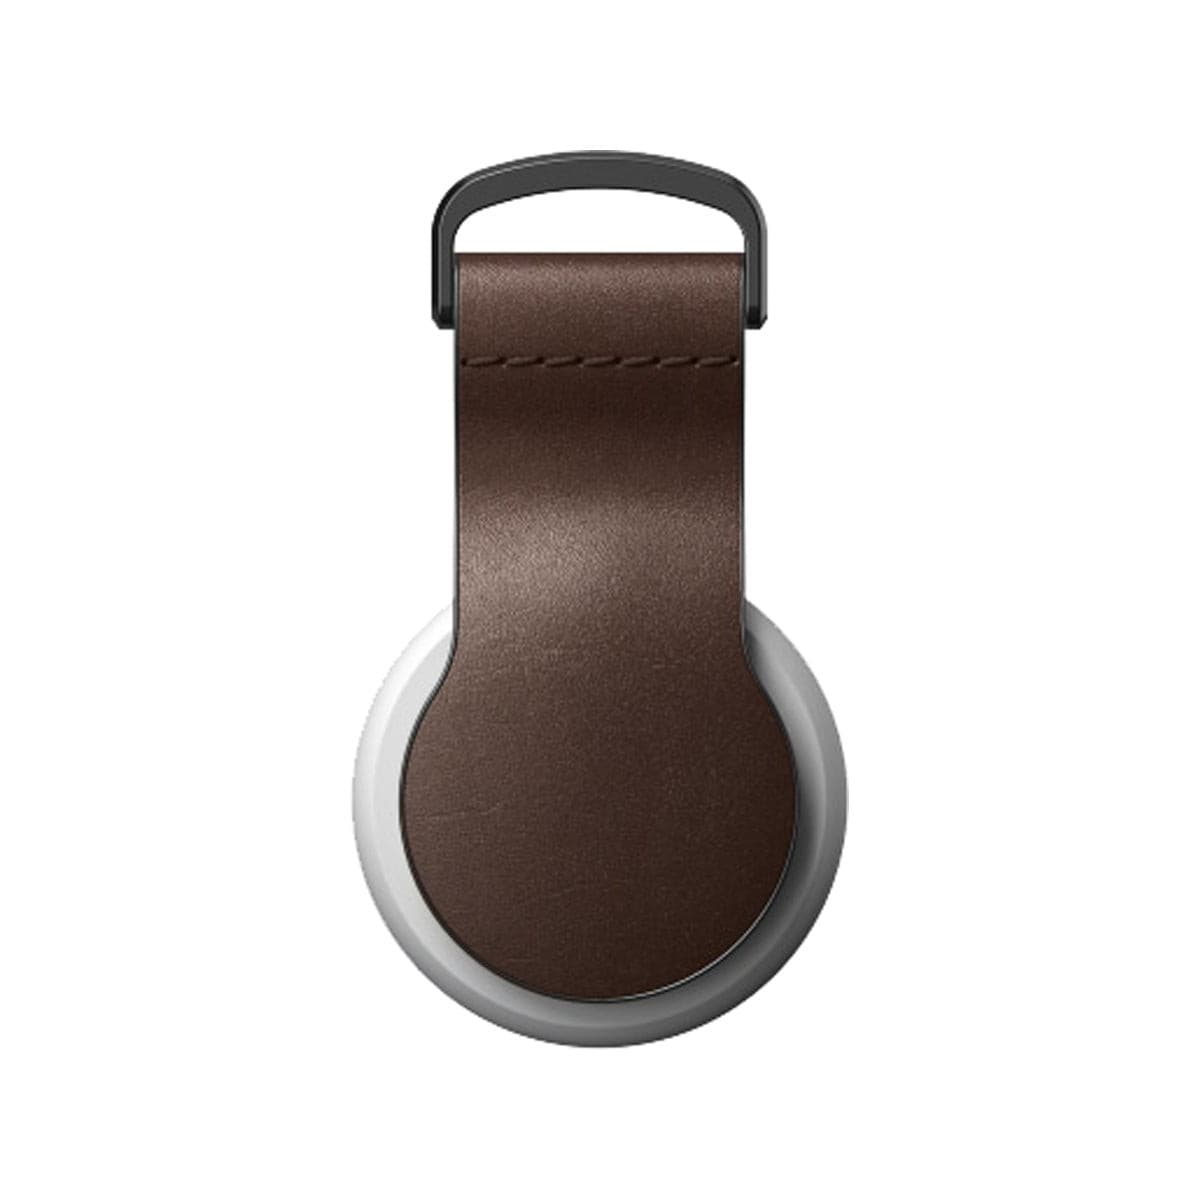 Nomad Leather Loop for AirTag - Rustic Brown Horween Leather.